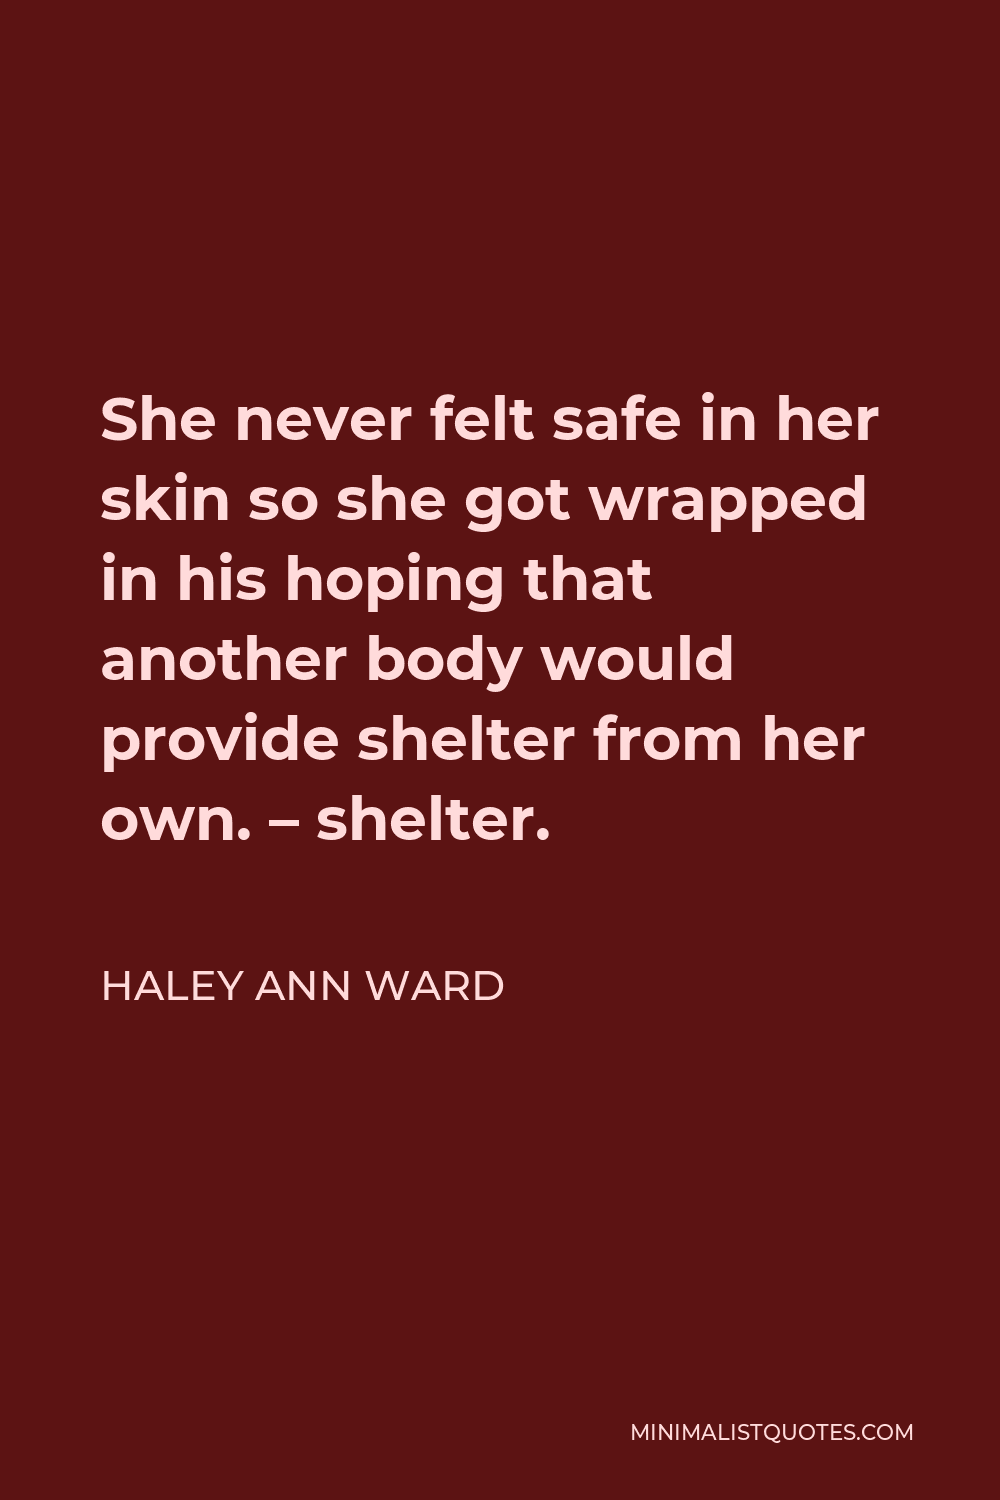 Haley Ann Ward Quote - She never felt safe in her skin so she got wrapped in his hoping that another body would provide shelter from her own. – shelter.